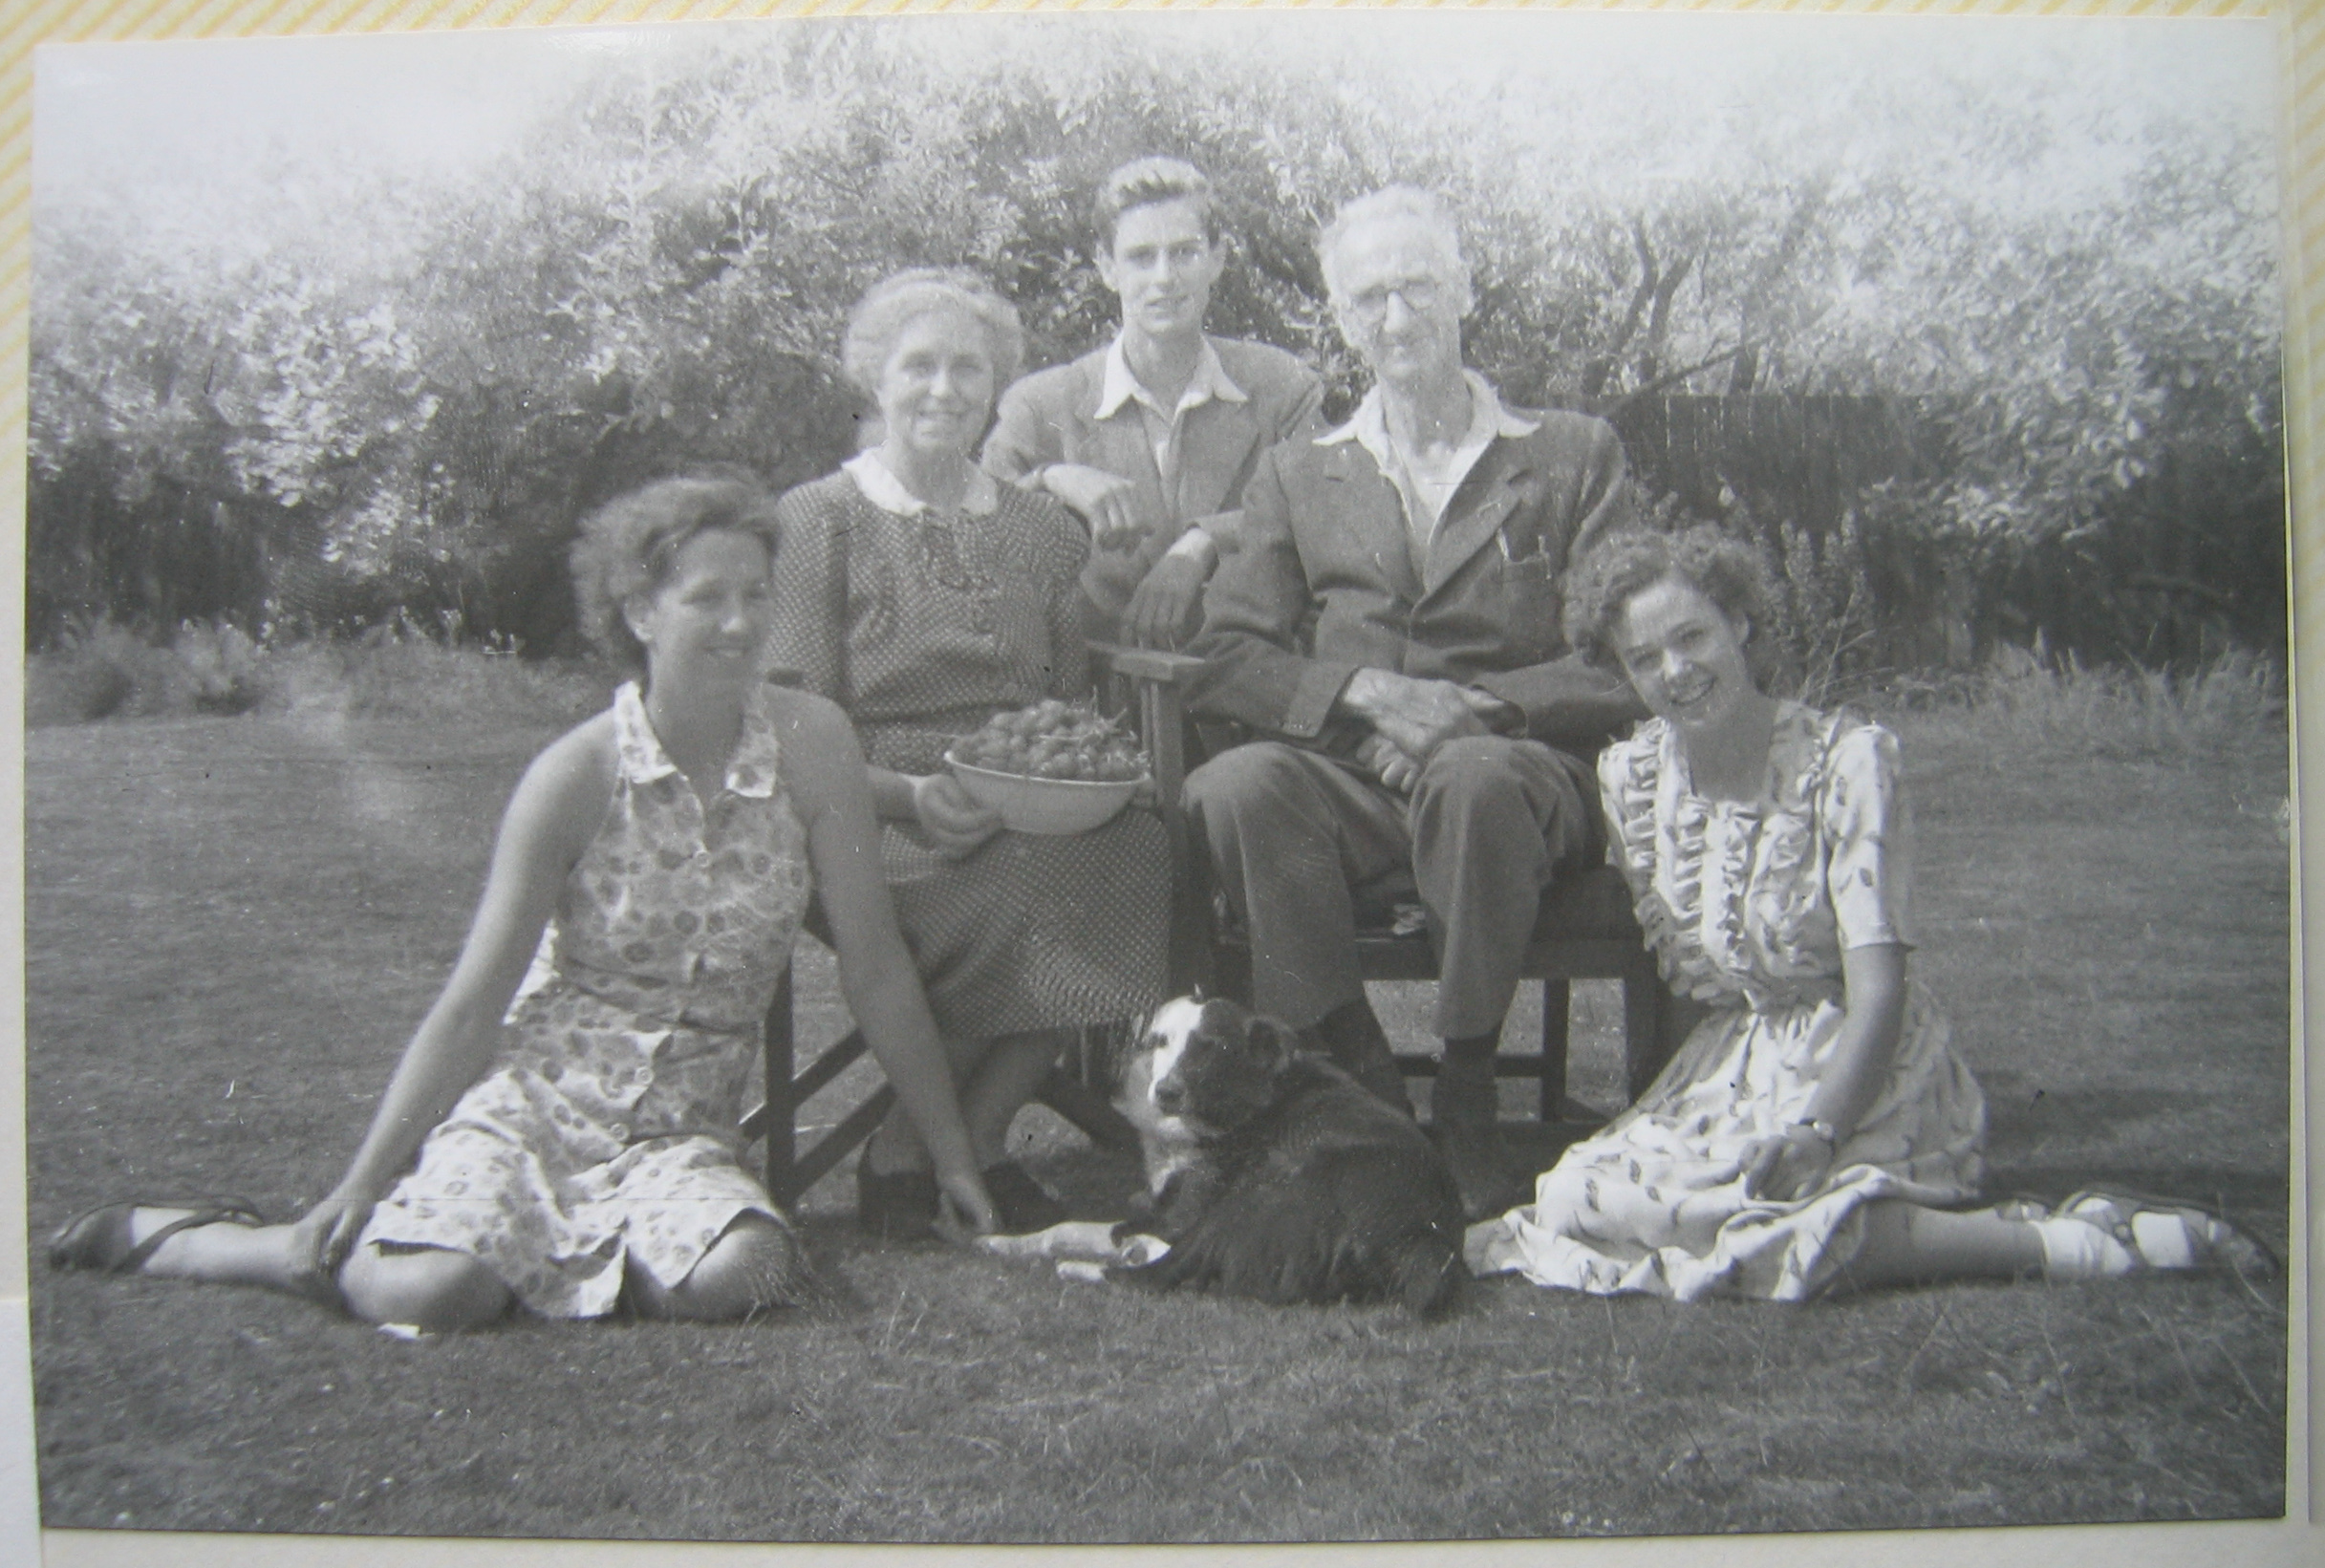 The Bearmans, presumably at Noonsun in the late 1940s